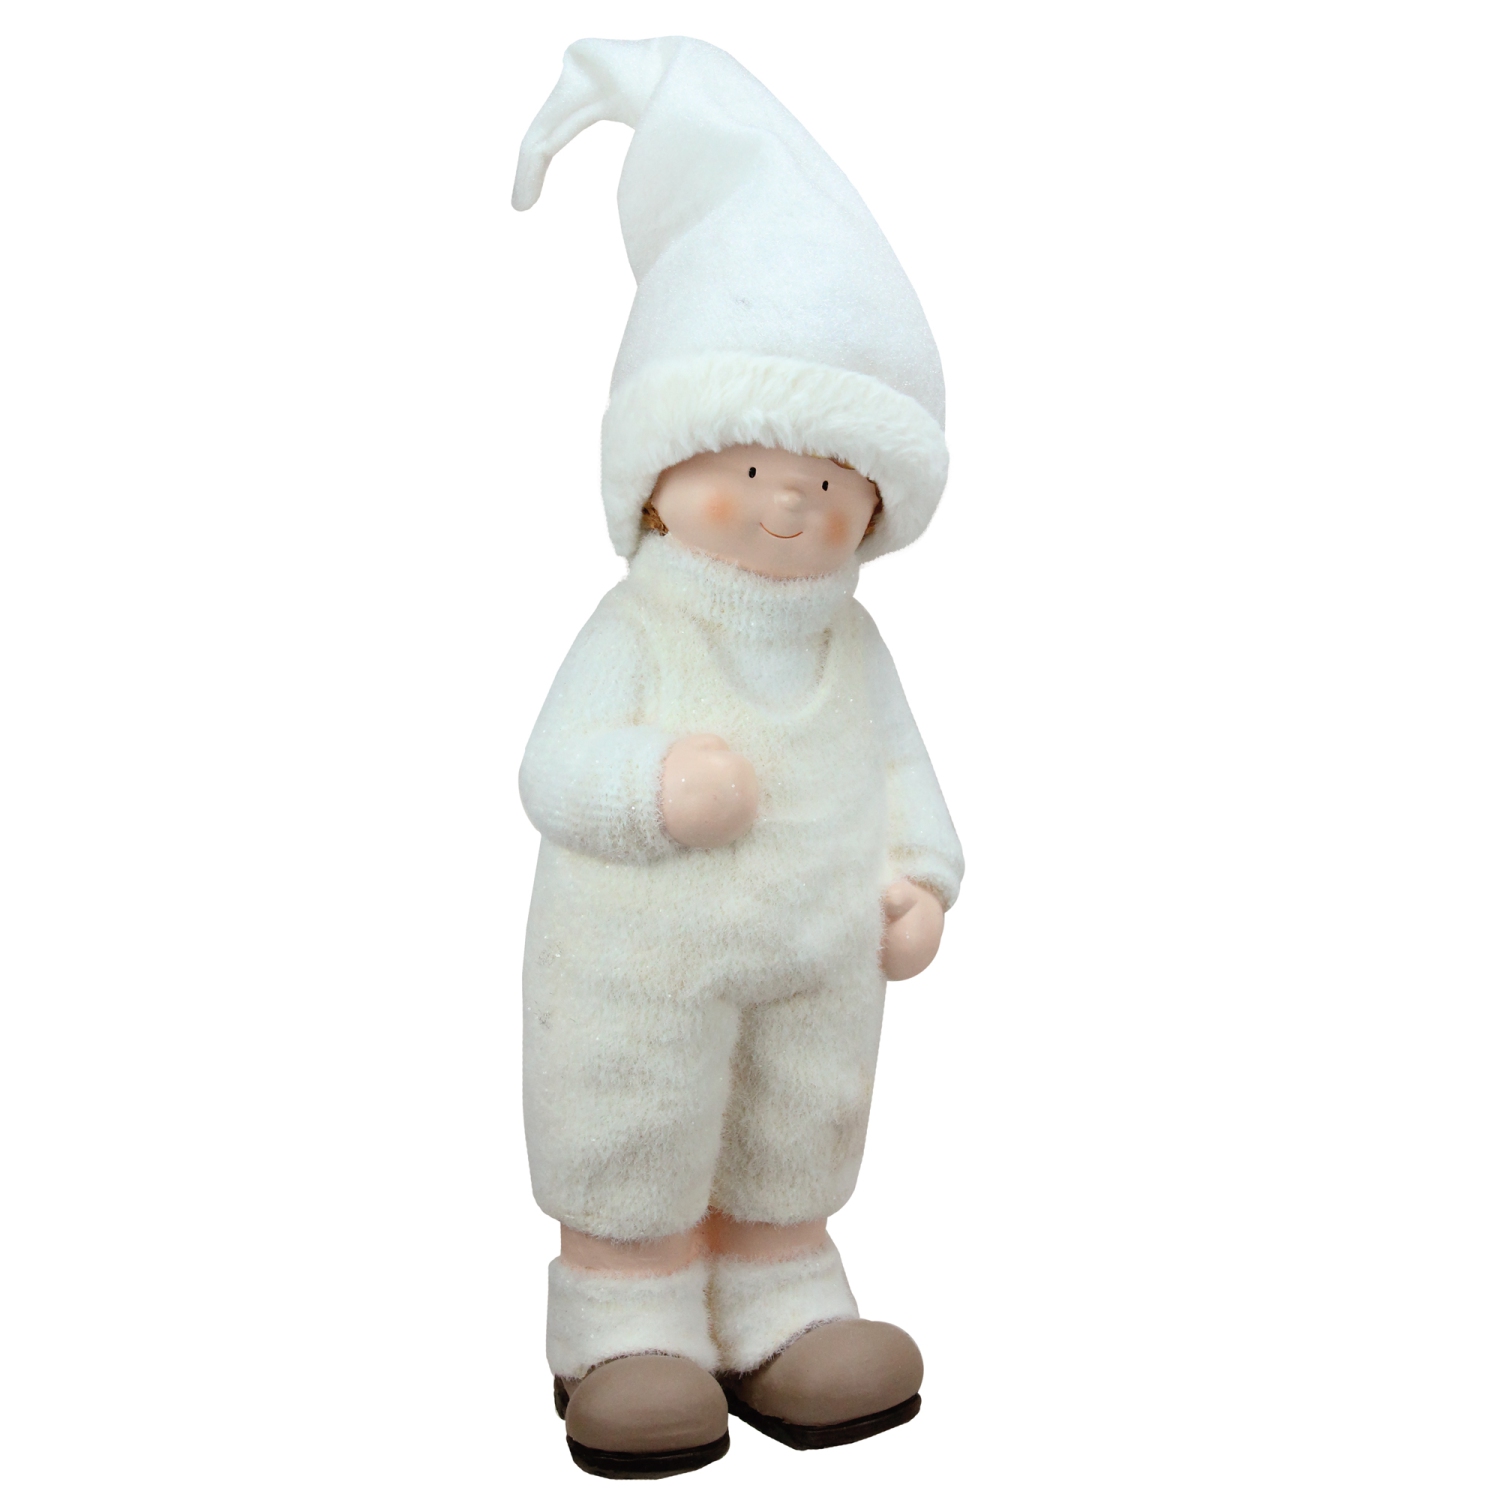 19" White and Beige Winter Boy with Tall Hat Christmas Table Top Figure